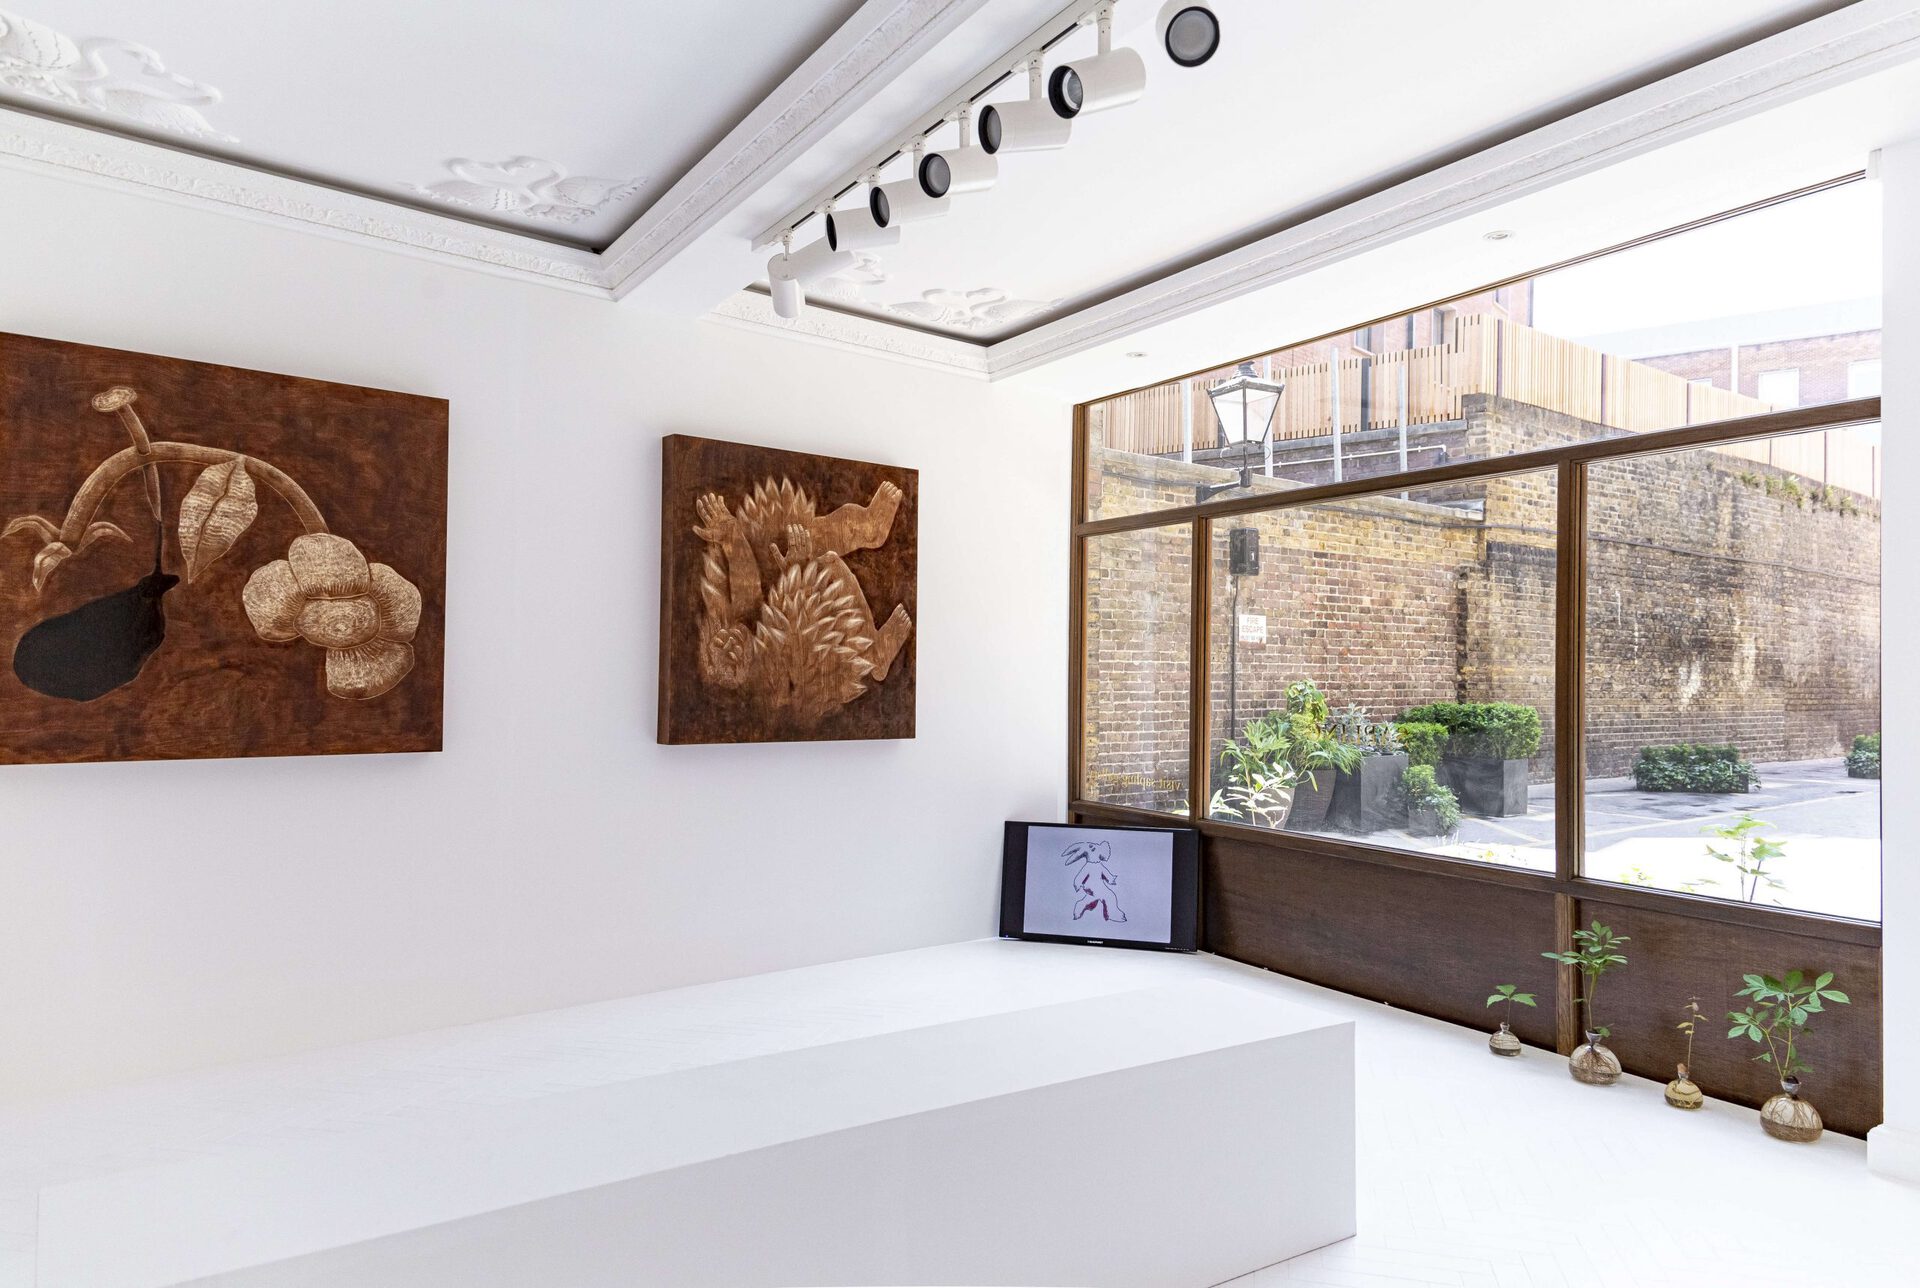 Installation View of 'Thoughts to fall asleep to' at Sapling in London, Photography: Alice Lubbock, 2021